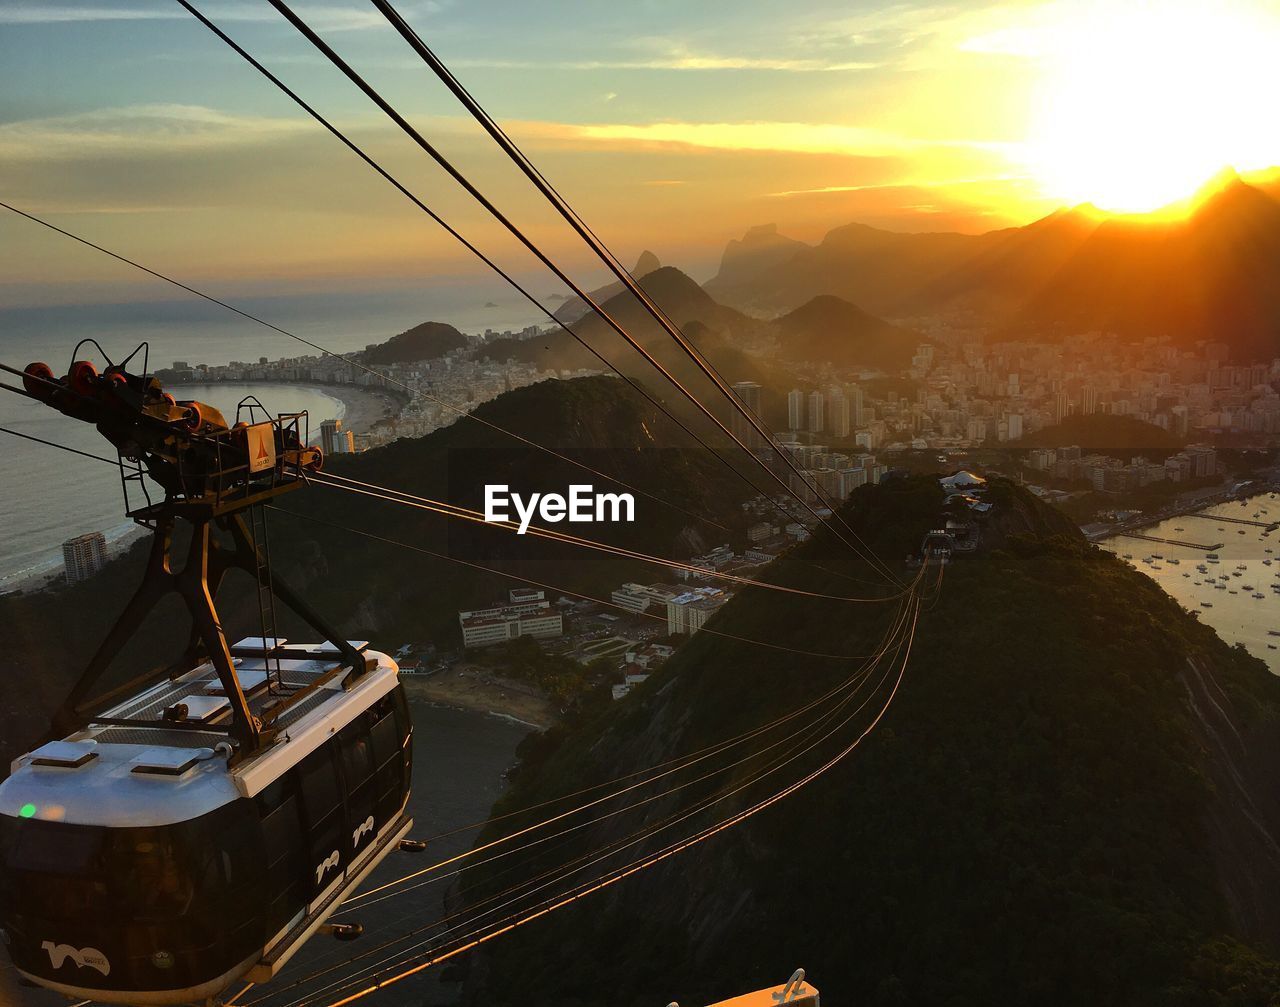 Overhead cable car against mountains during sunset